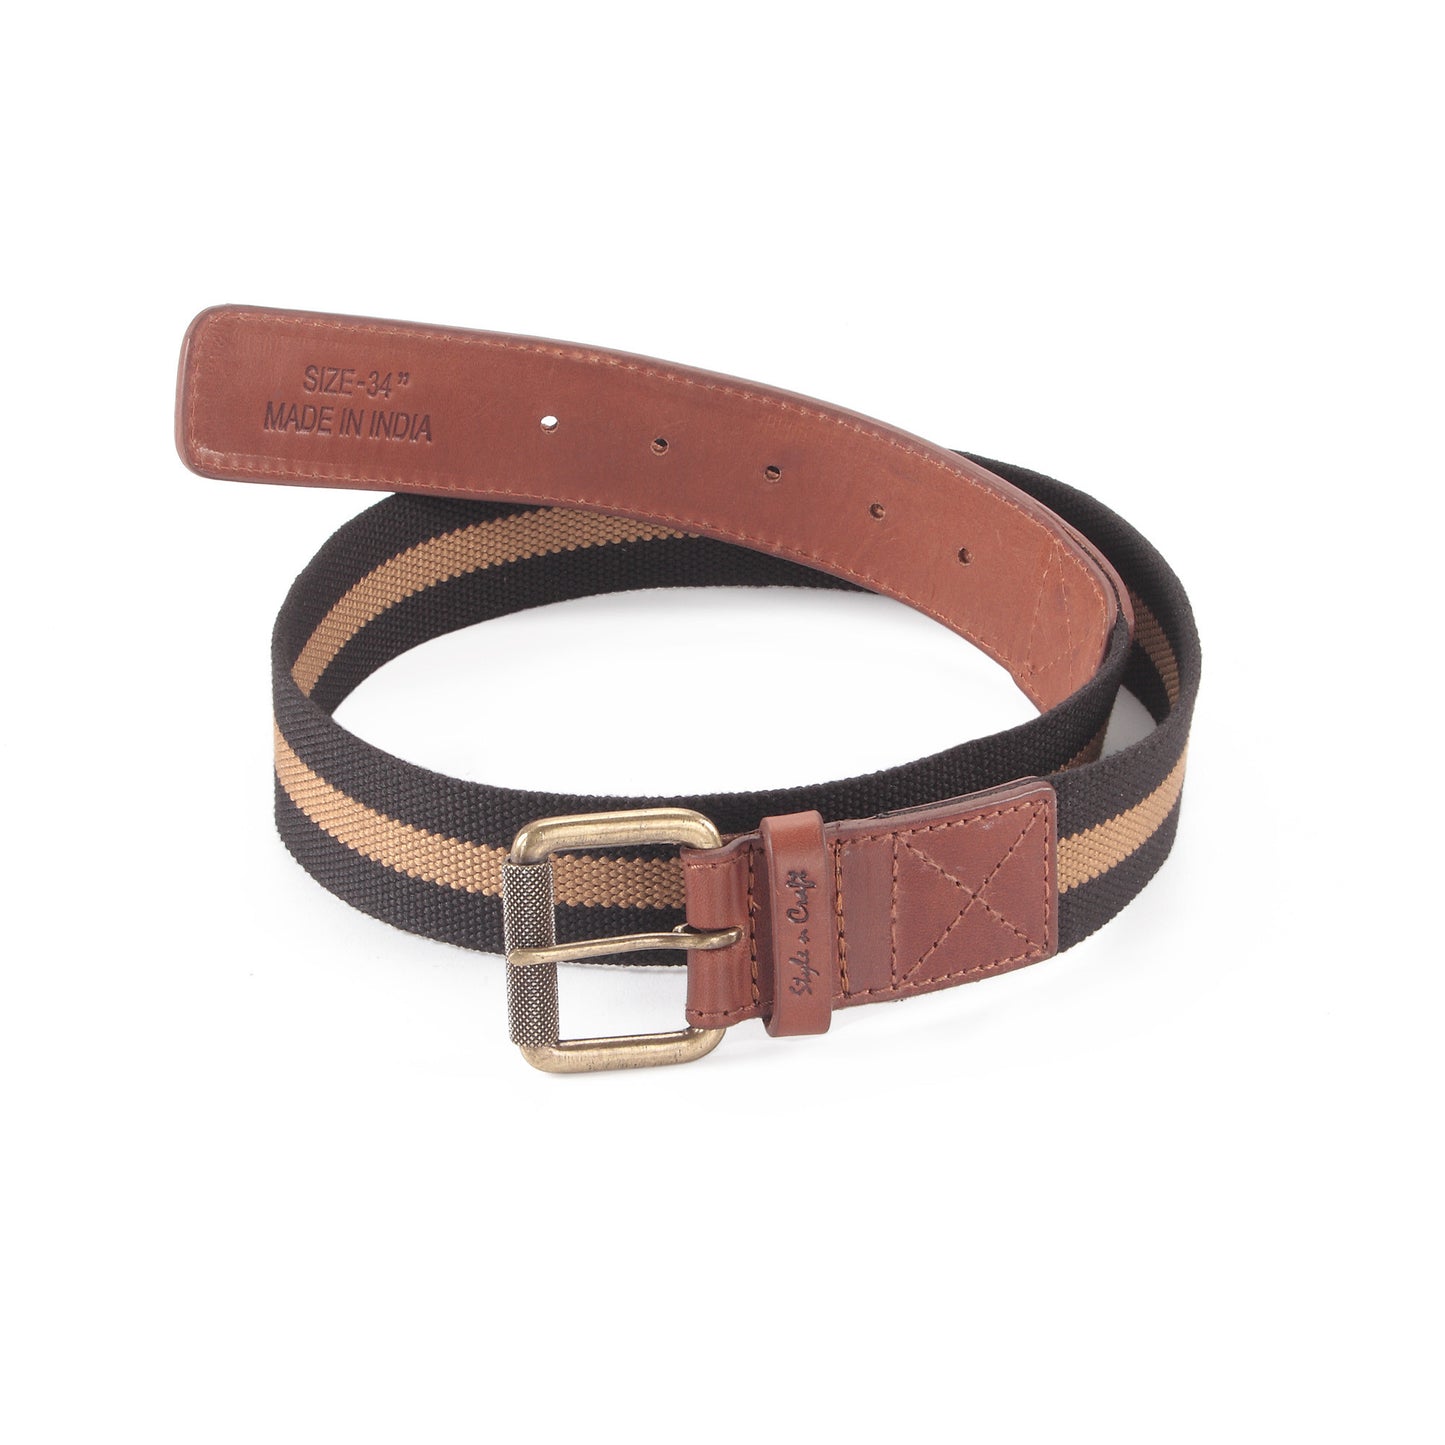 390343 - One and a Half Inch Wide Leather Webbing Combination Belt - brandy / tan color leather - front view